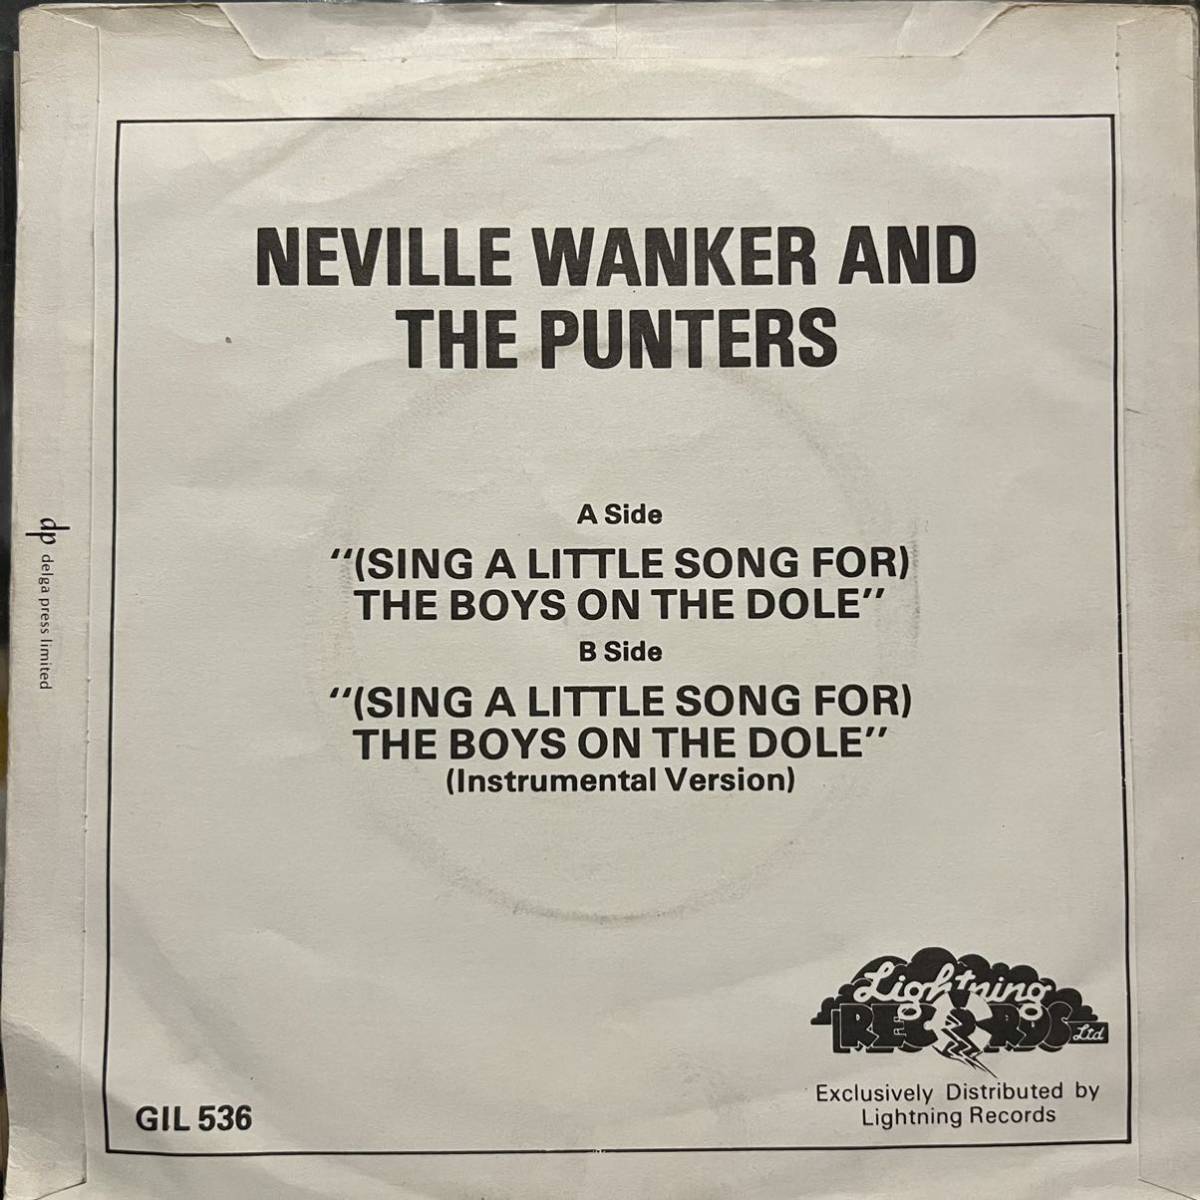 Neville Wanker And The Punters Sing A Little Song For The Boys On The Dole punk небо страна kbd оригинал запись punk power pop mods 77punk